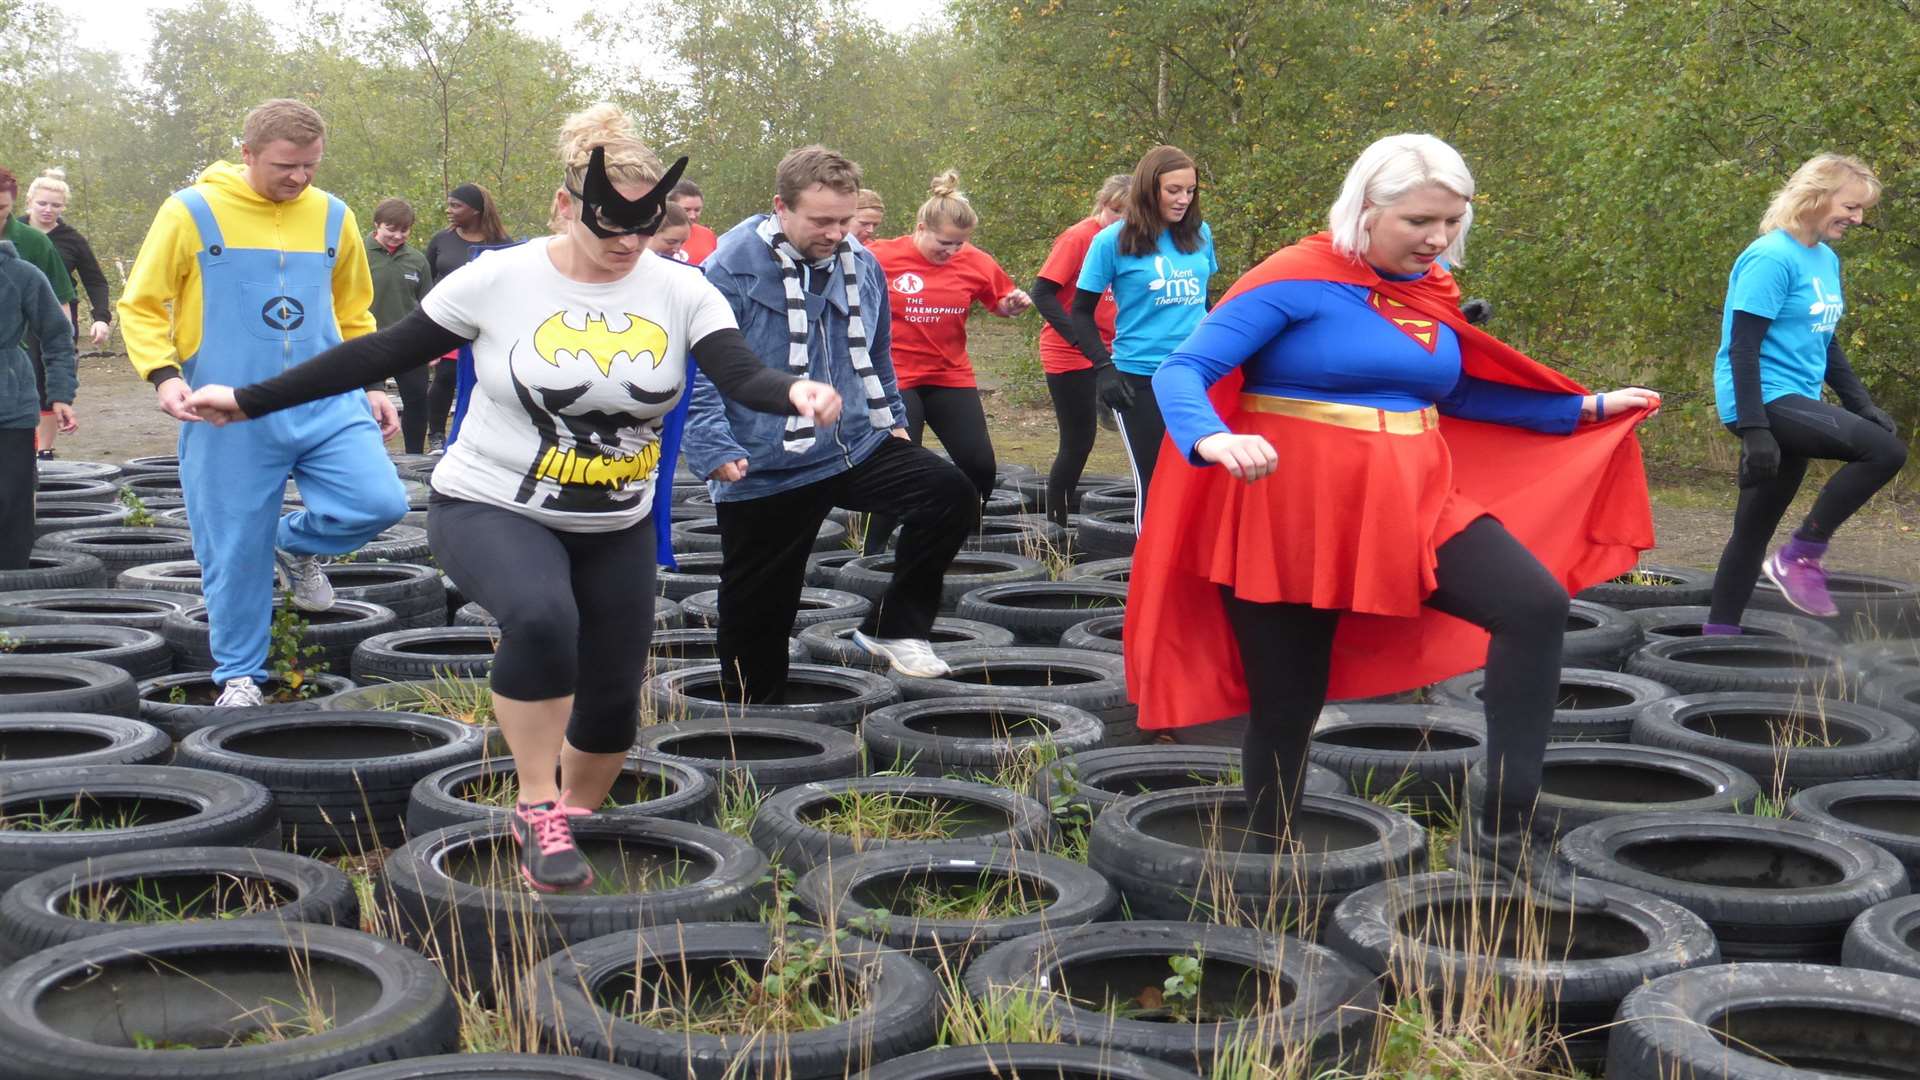 Charities and their supporters can raise funds through events including the KM Assault Course Challenge which this year topped £15,000 for 23 good causes.